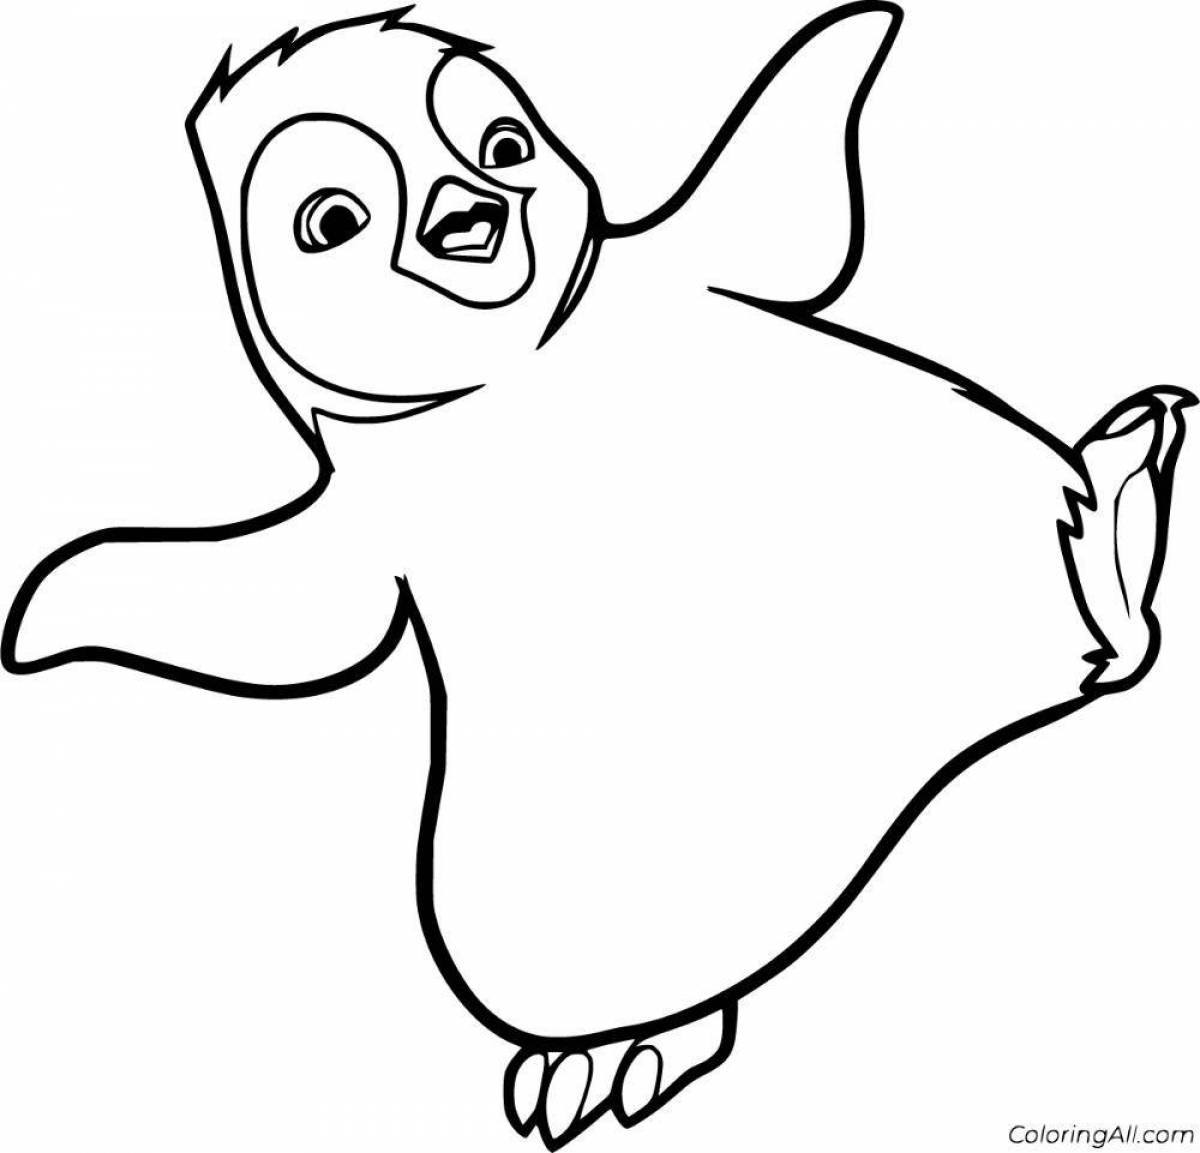 Gleeful coloring page funny penguin